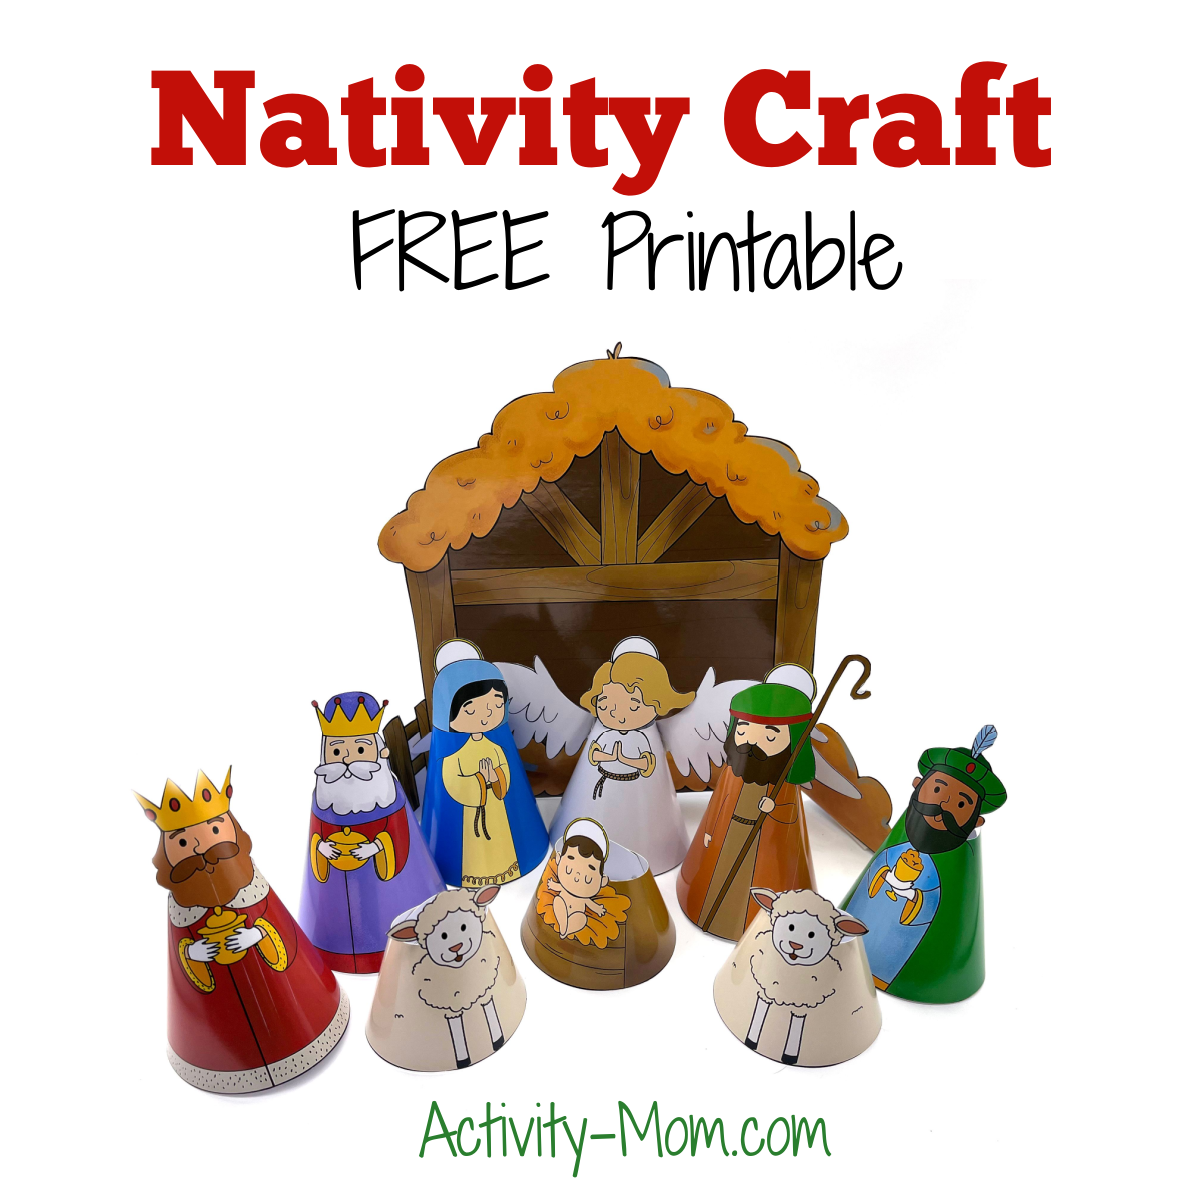 Nativity craft for kids free printable